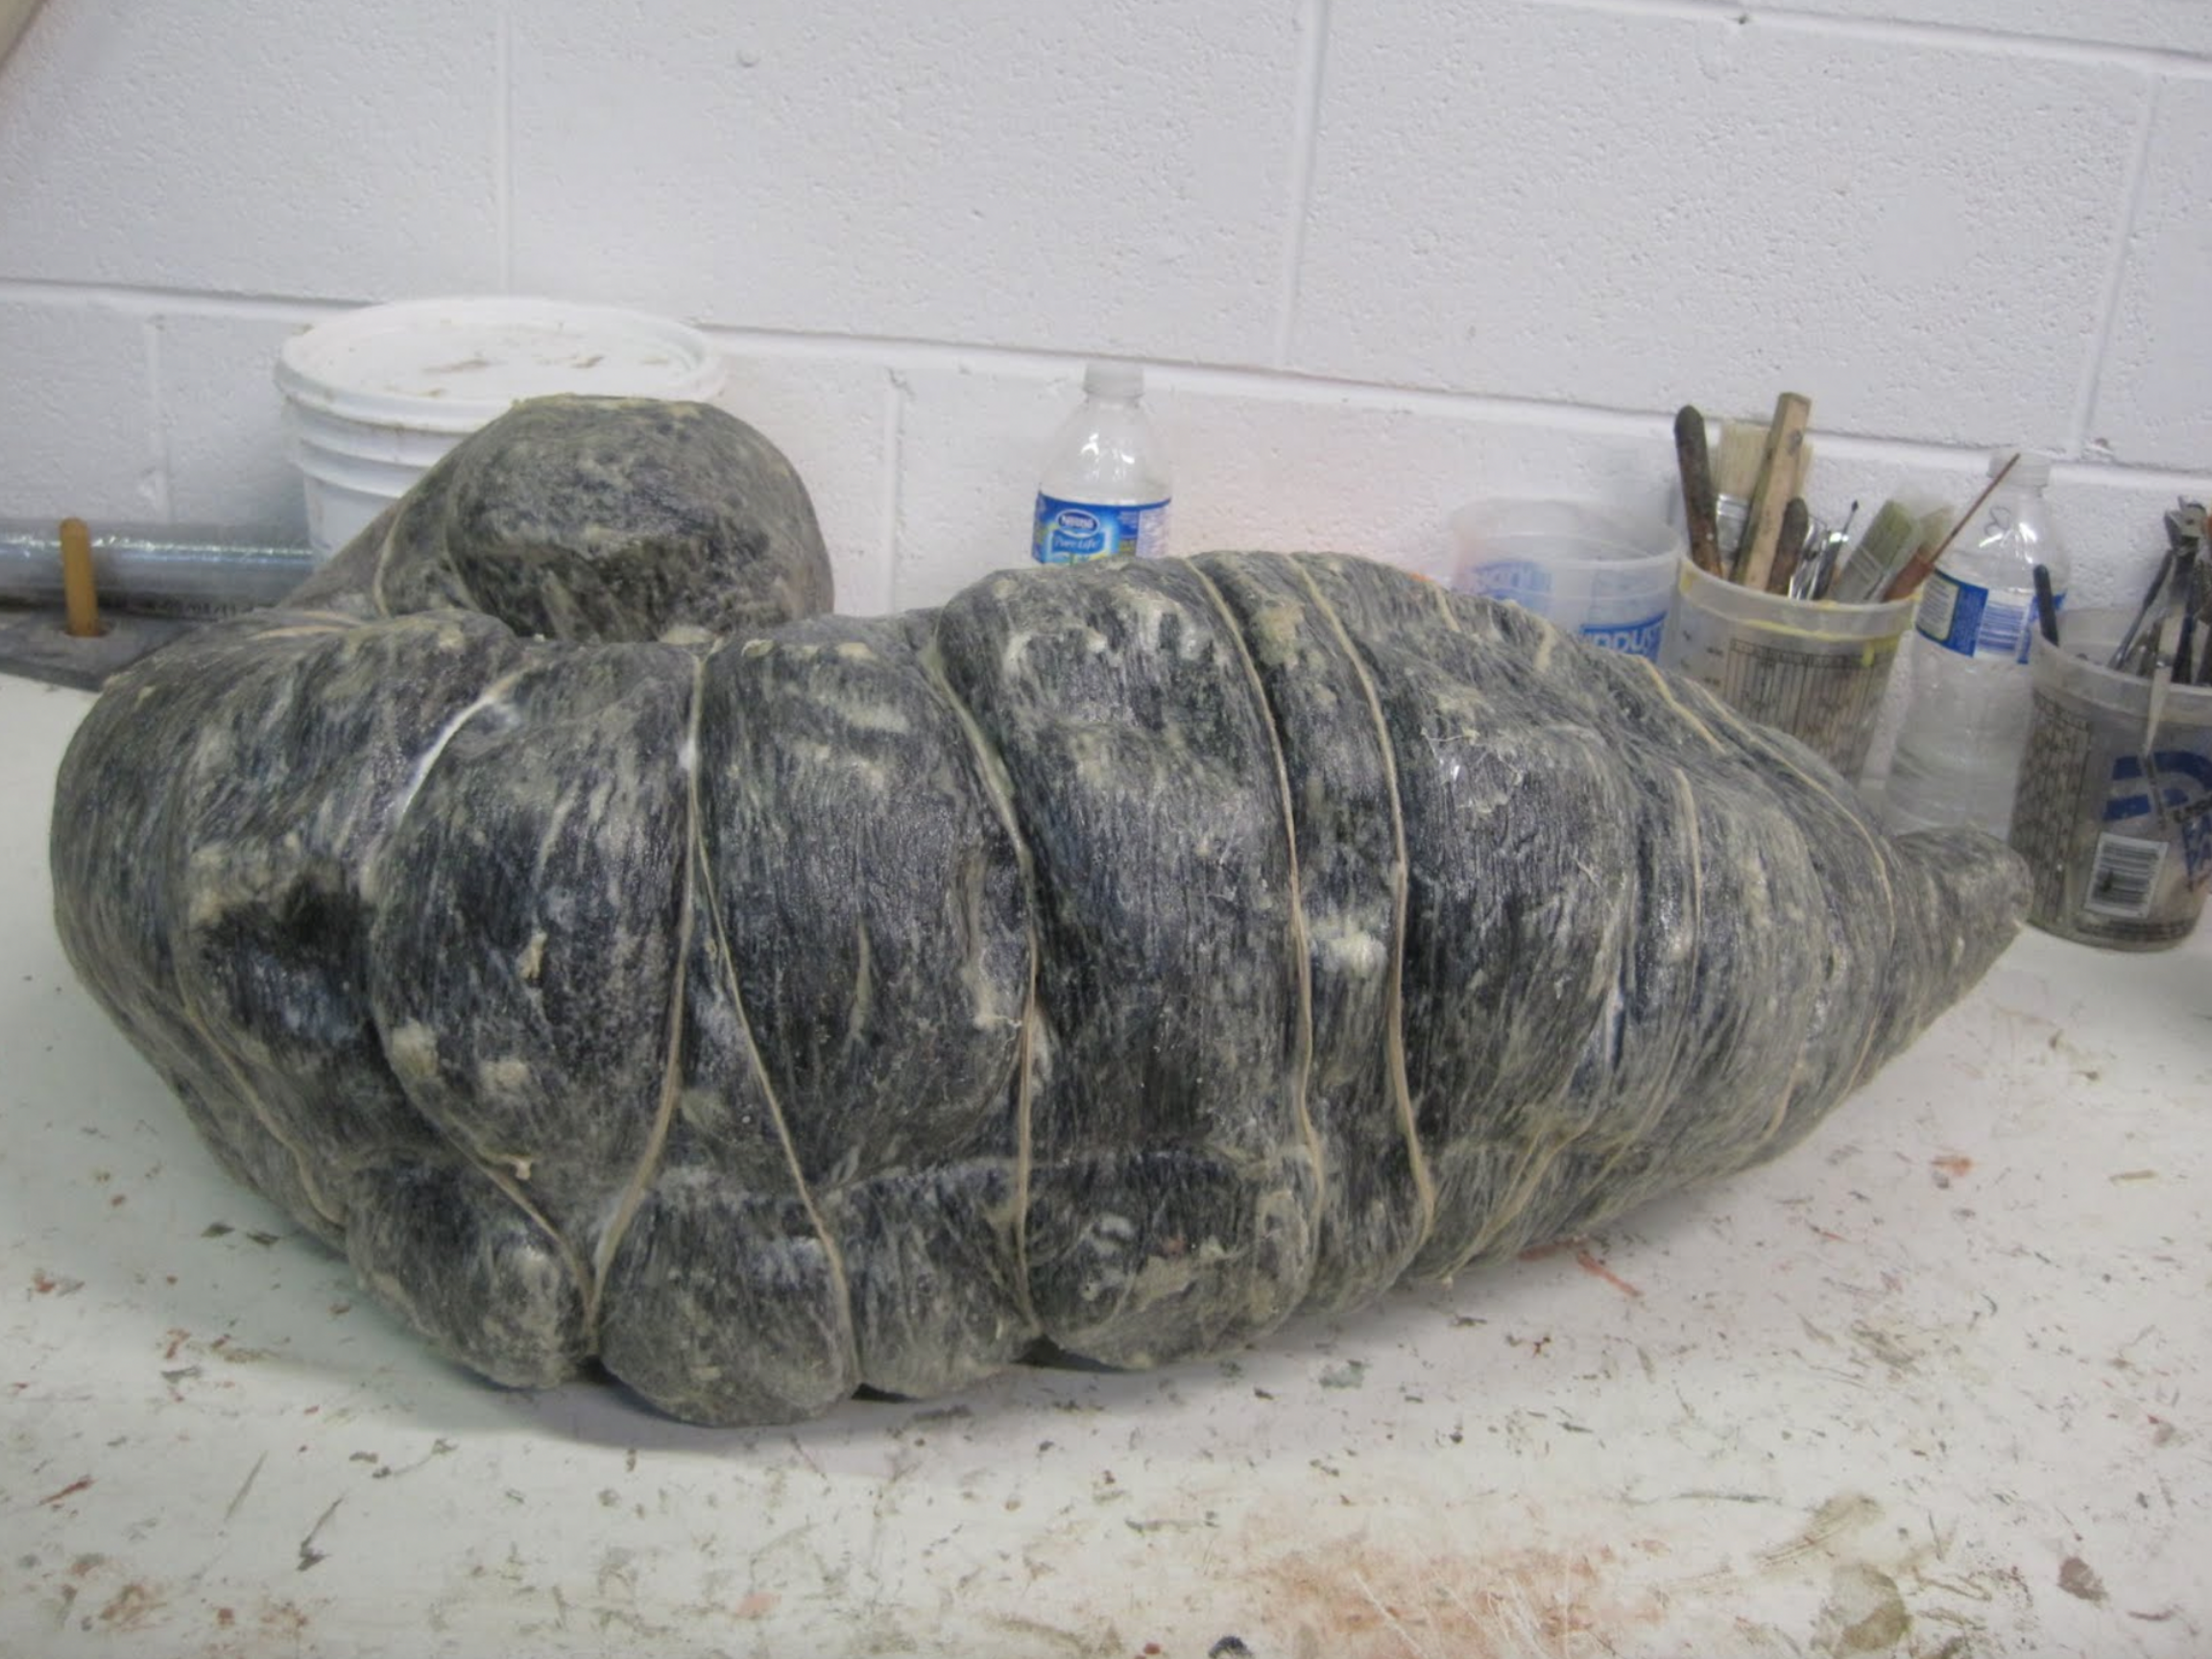 In this image we have the equine secum core that has been coated in preparation for materials testing.